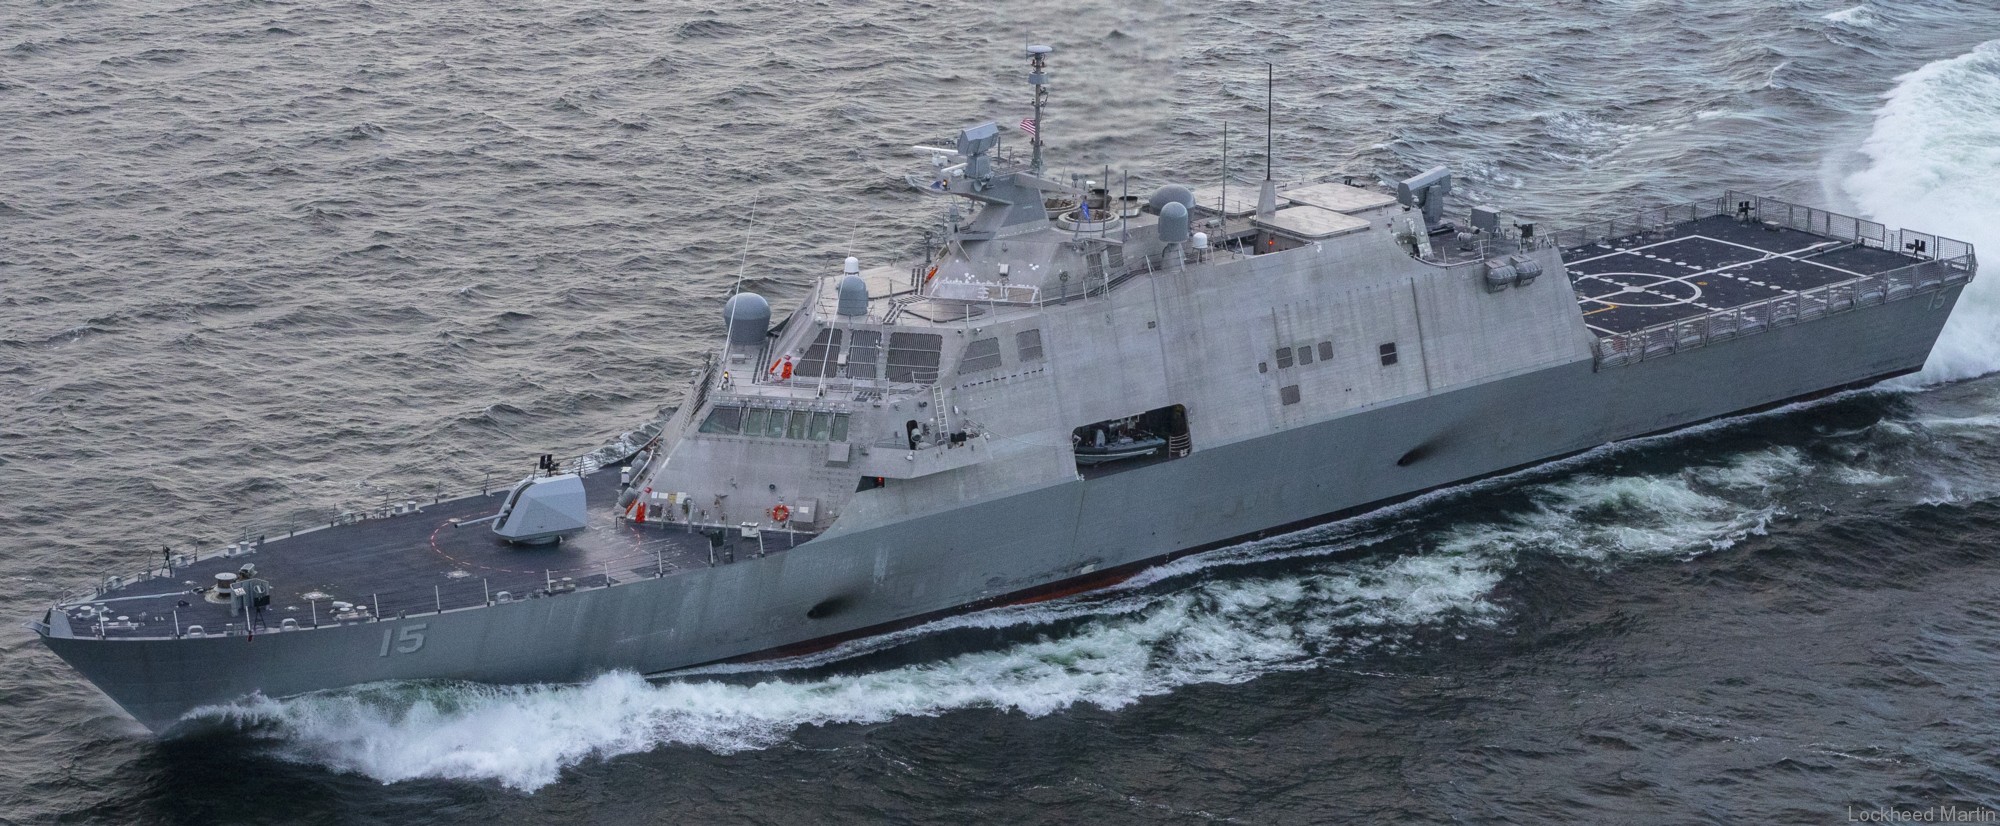 lcs-15 uss billings freedom class littoral combat ship us navy 34